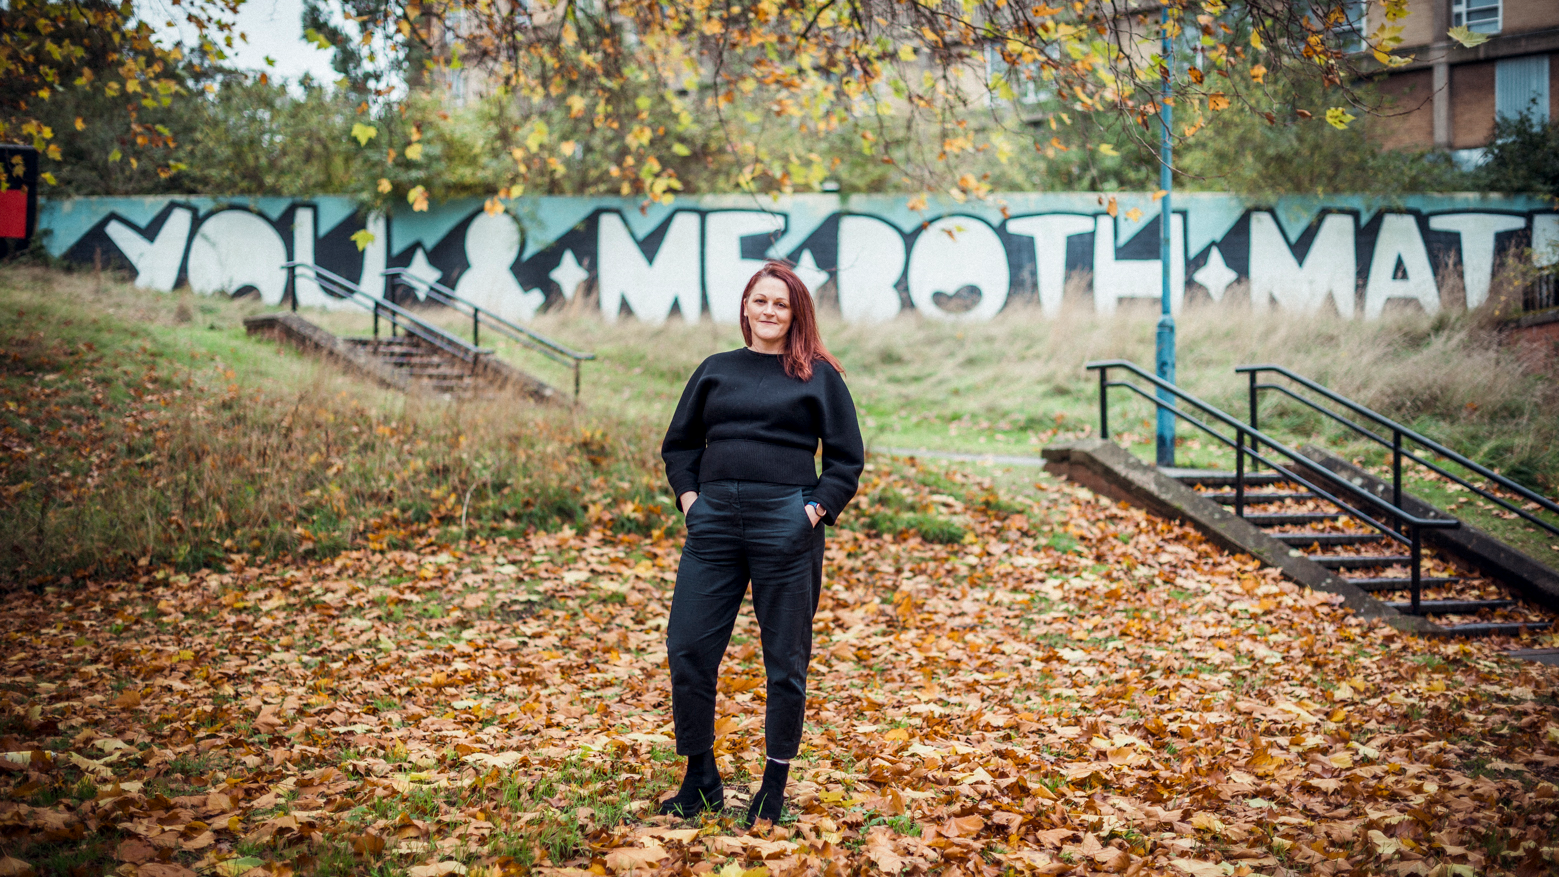 Annabel Grundy wearing a black jumper and trousers. Stood outside, surrounded by fallen autumn leaves. She's pictured against painted with a graffiti style mural - white text against a blue background reads: You and me both mate.